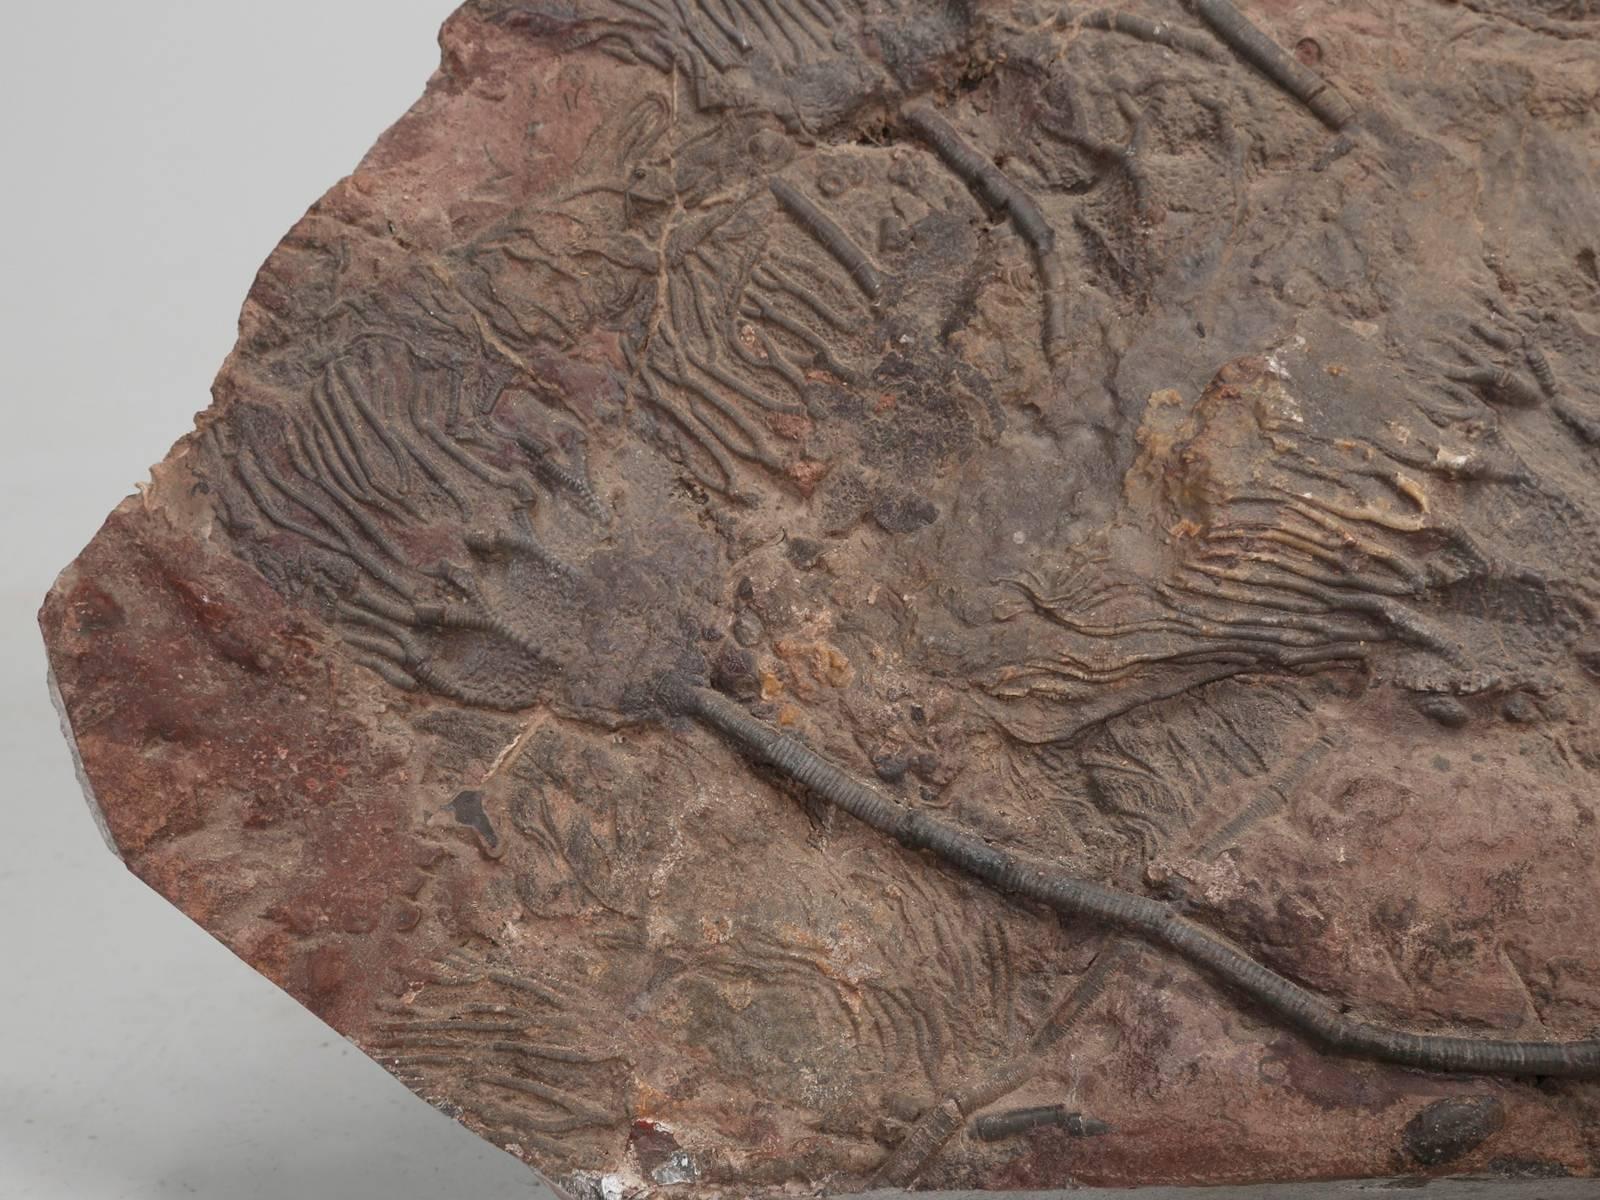 Fossil crinoid or Scyhocrinus elegans
From the Devonian period or about 360 million years old and discovered in Morocco.
Commonly referred to as sea lilies. Crinoids are a member of the echinoderm group of animals and lived in the sea.
 